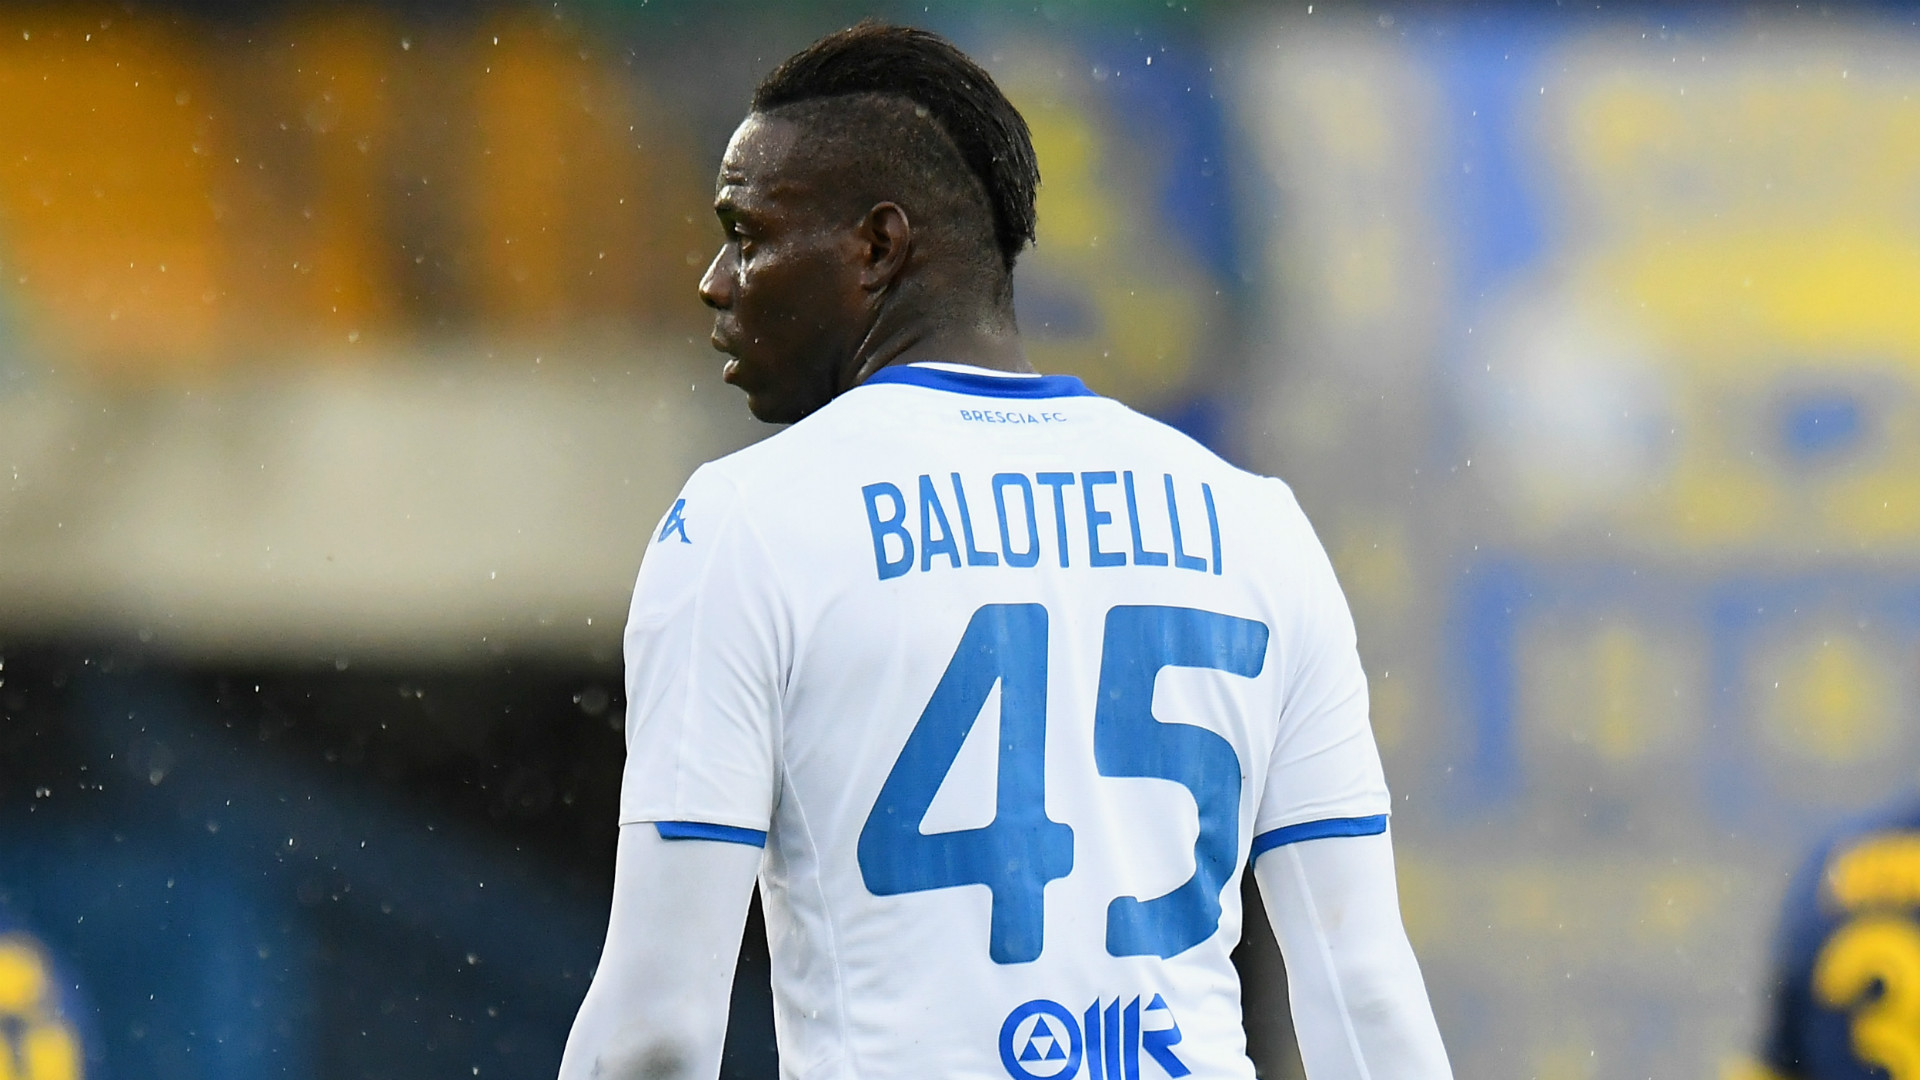 Balotelli racism protest was the 'right reaction', says Ancelotti